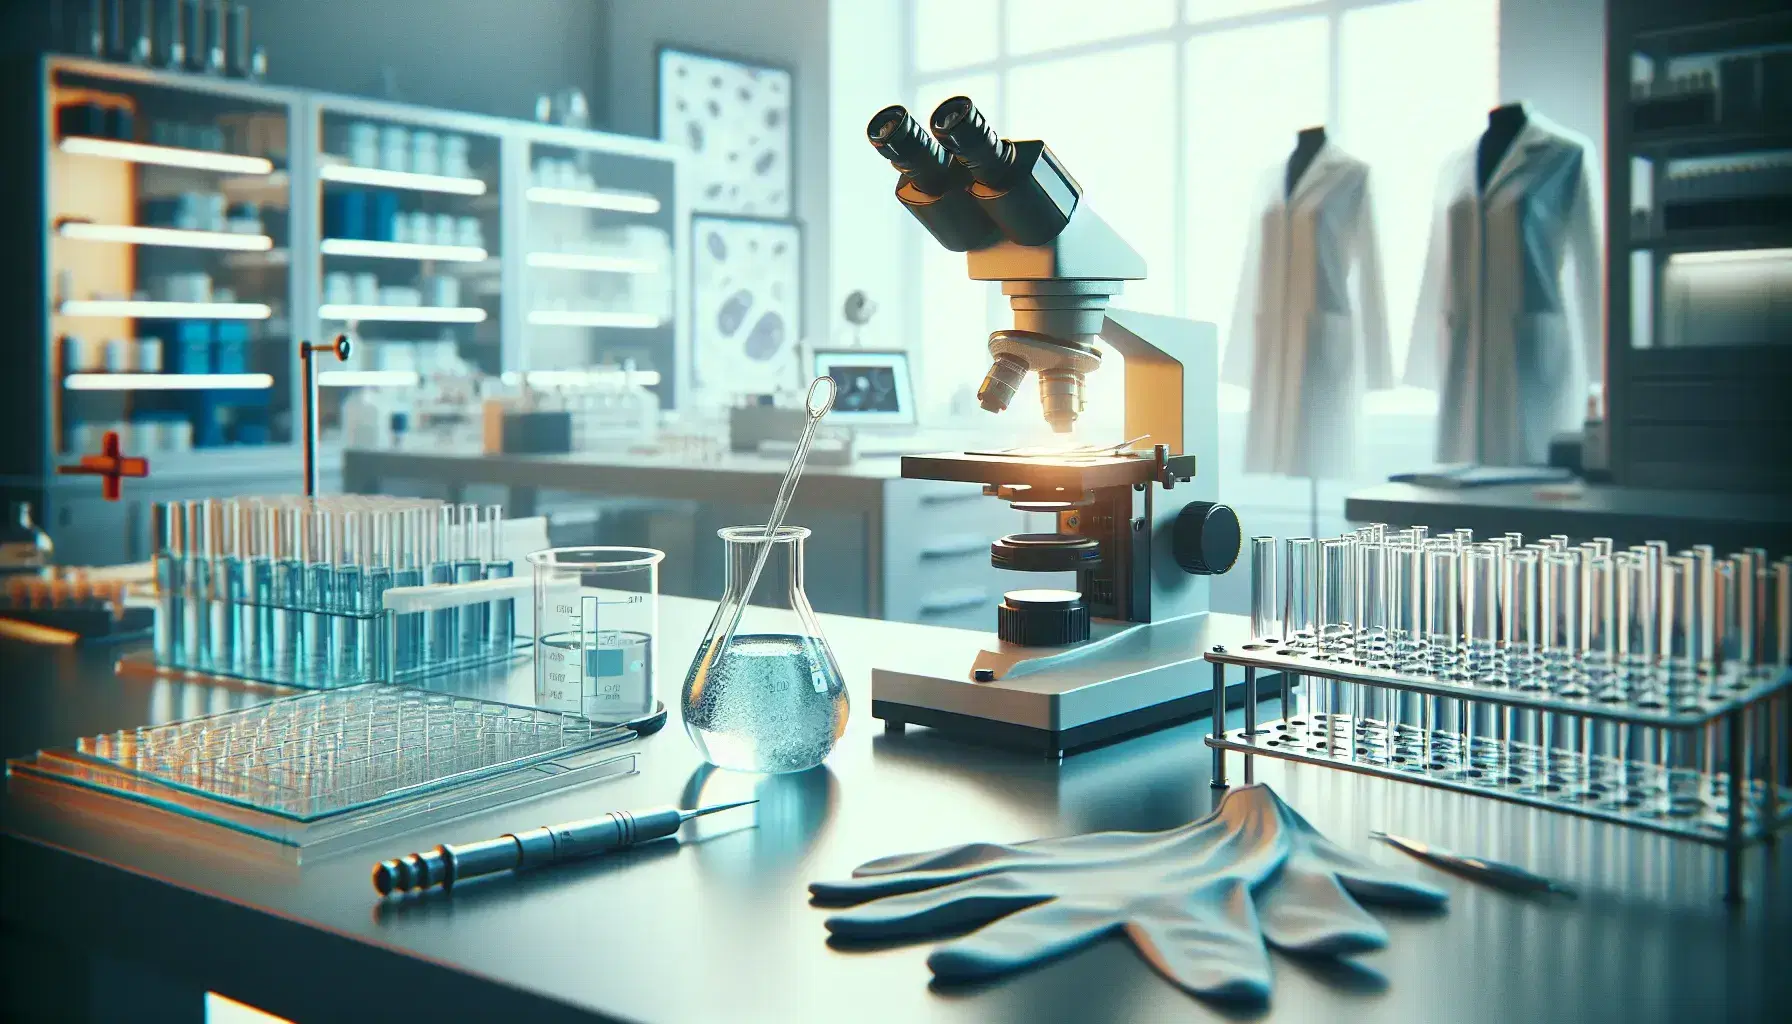 Laboratory with beaker of blue liquid, pipette, microscope, slides and latex gloves on workbench, white coat blurred in background.